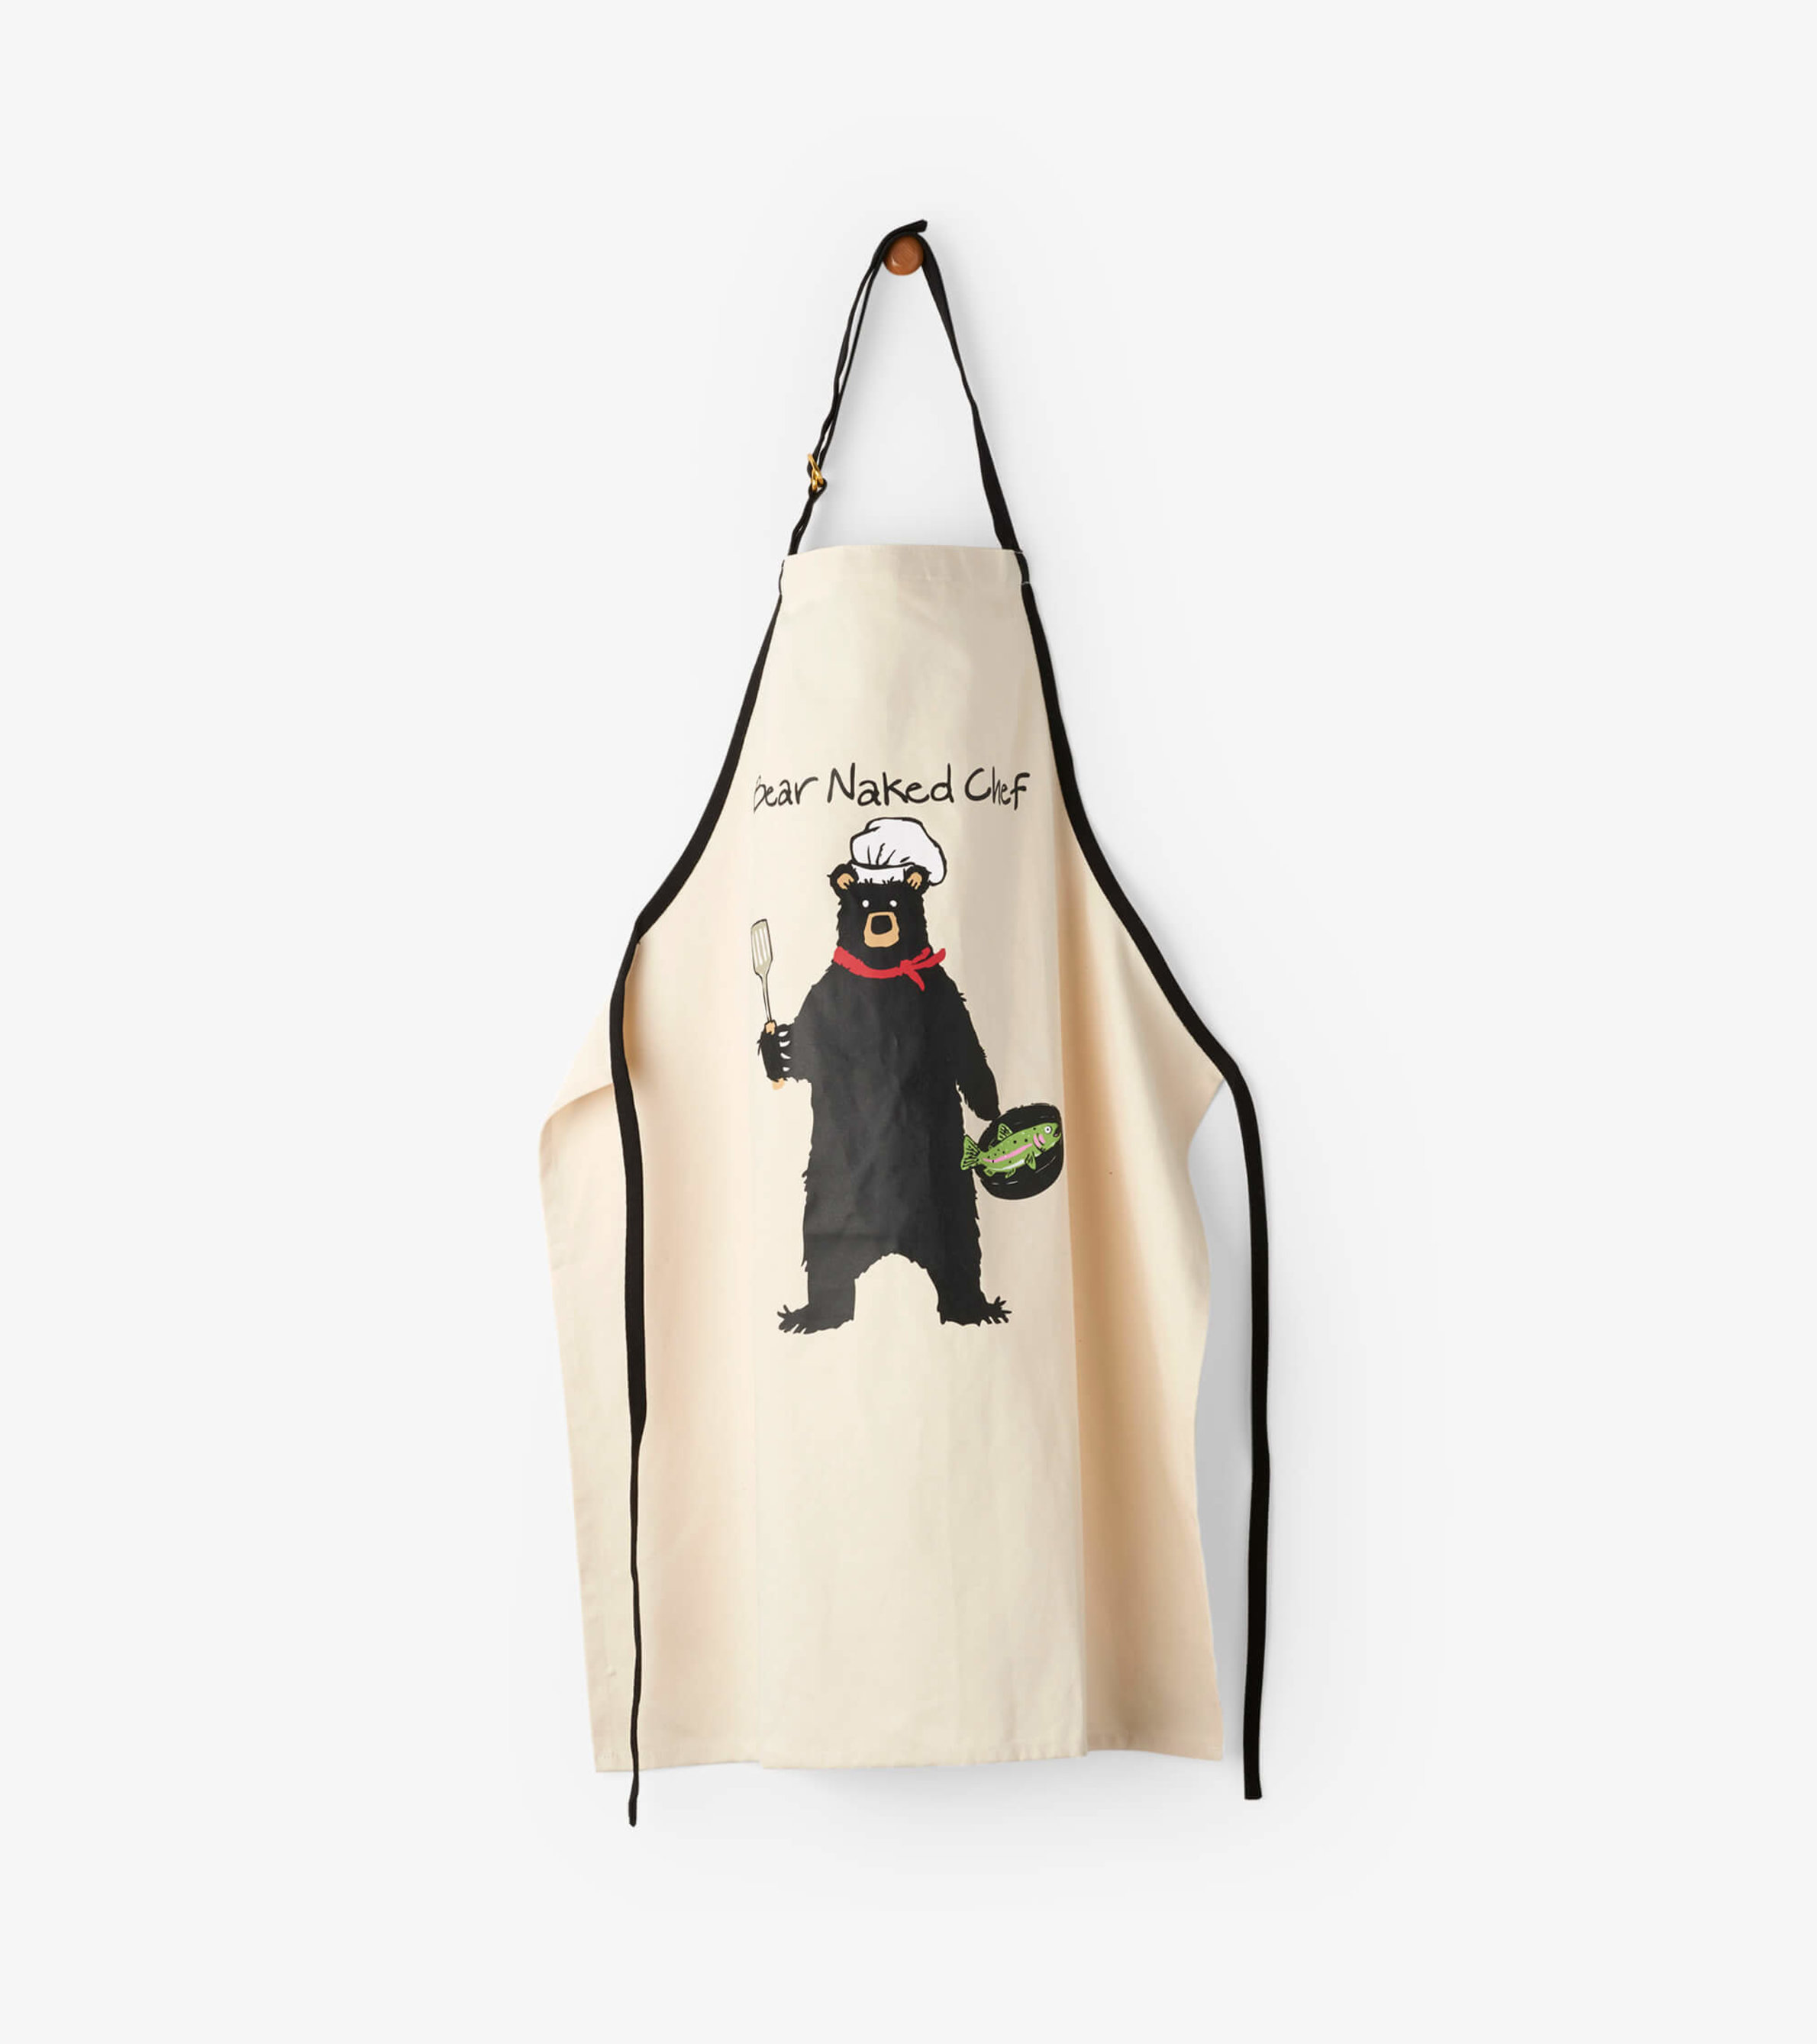 Best of Bear naked chef